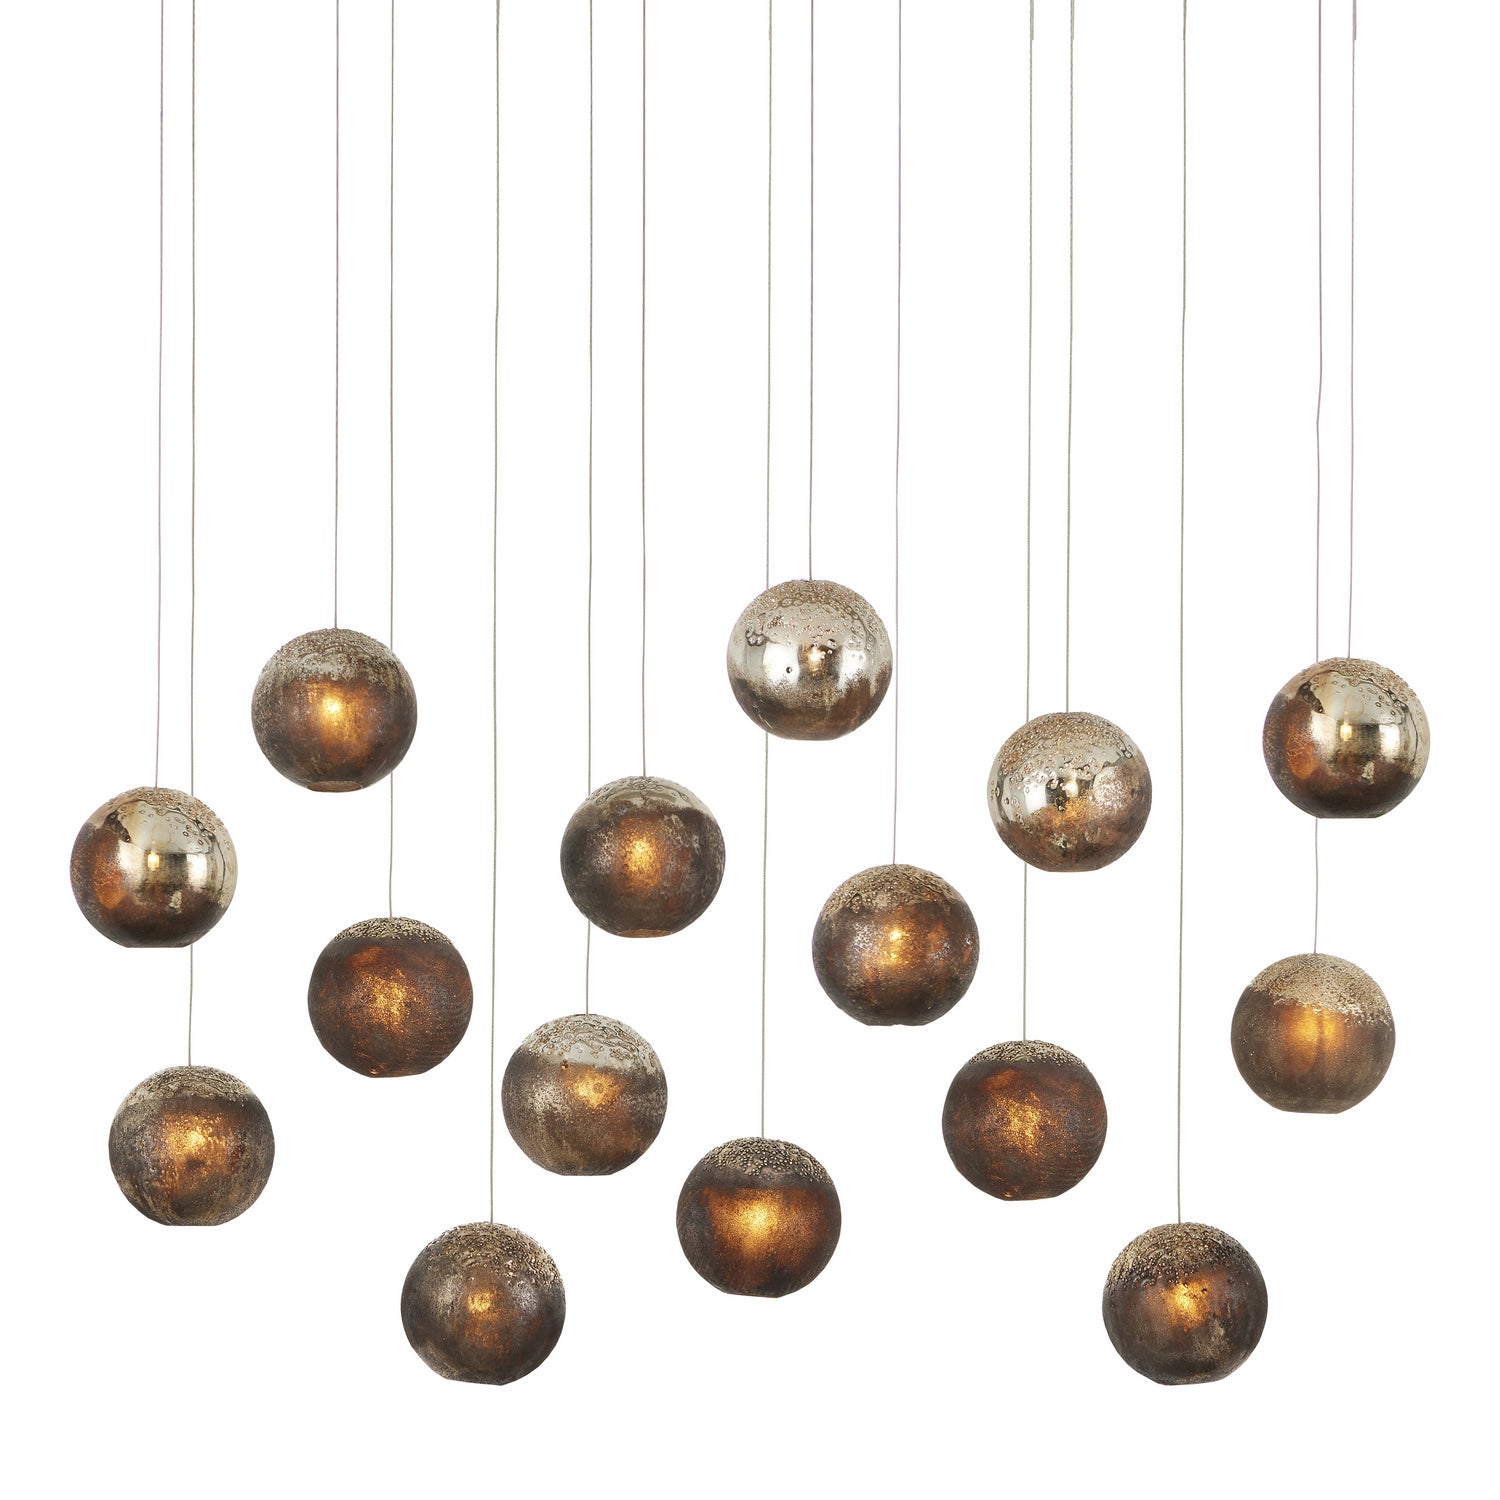 Currey and Company - 9000-1016 - 15 Light Pendant - Pathos - Antique Silver/Antique Gold/Matte Charcoal/Silver